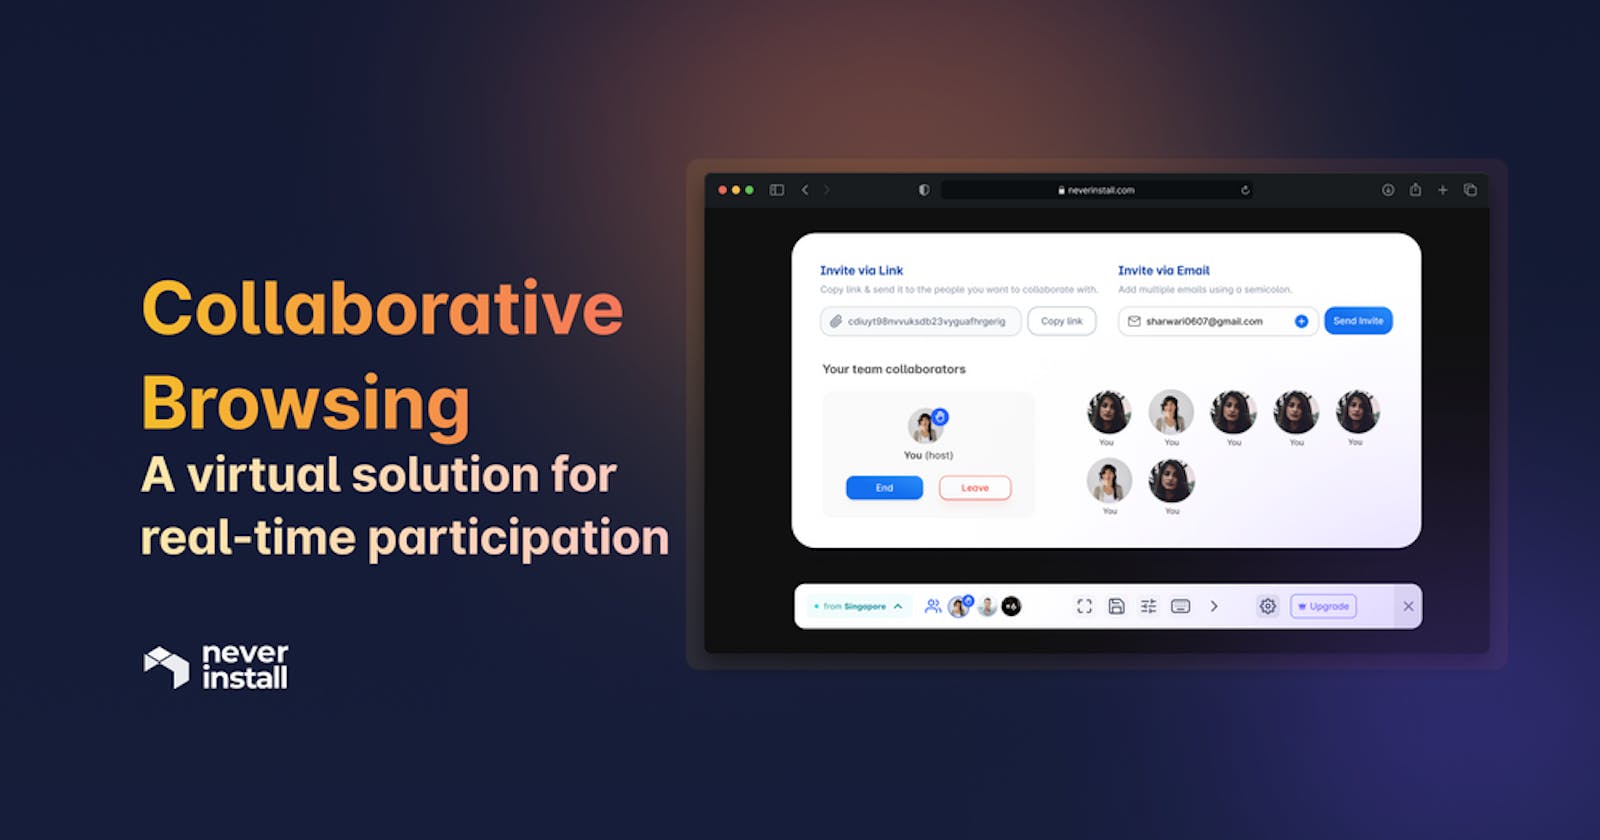 Collaborative Browsing: A virtual solution for real-time participation